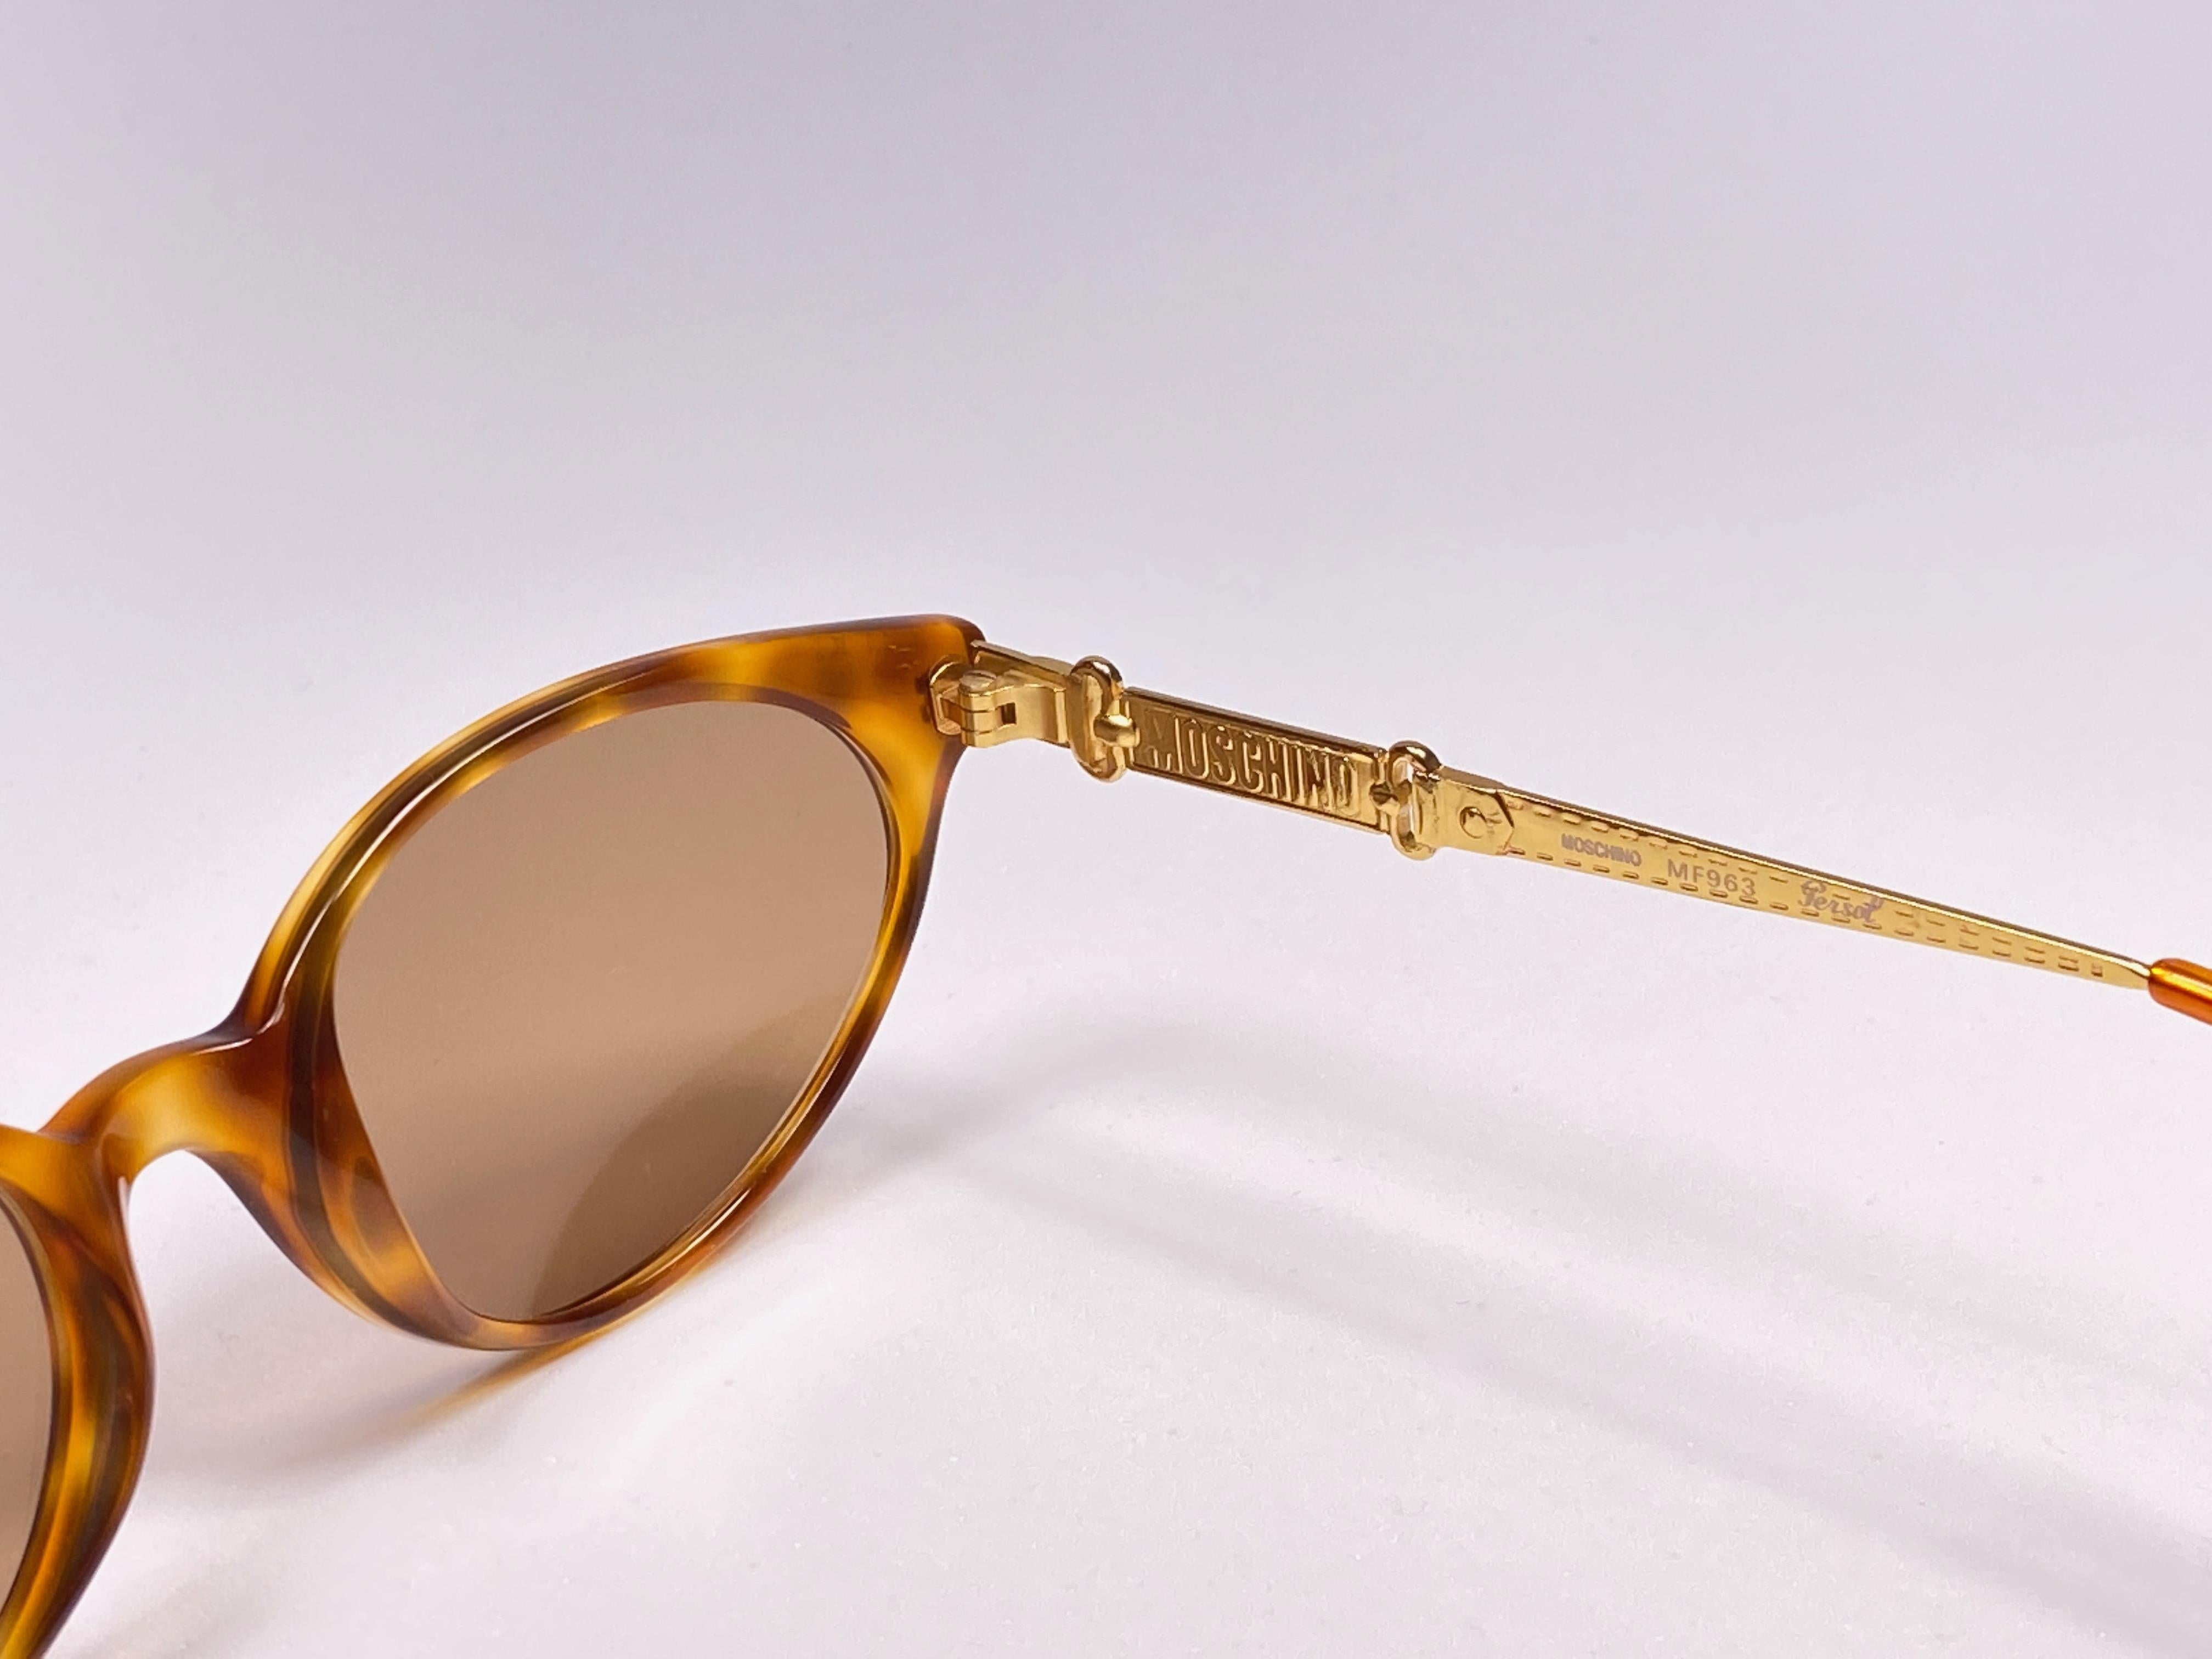 Brown New Vintage Moschino By Persol Tortoise MF963 Cat Eye Sunglasses Made in Italy For Sale